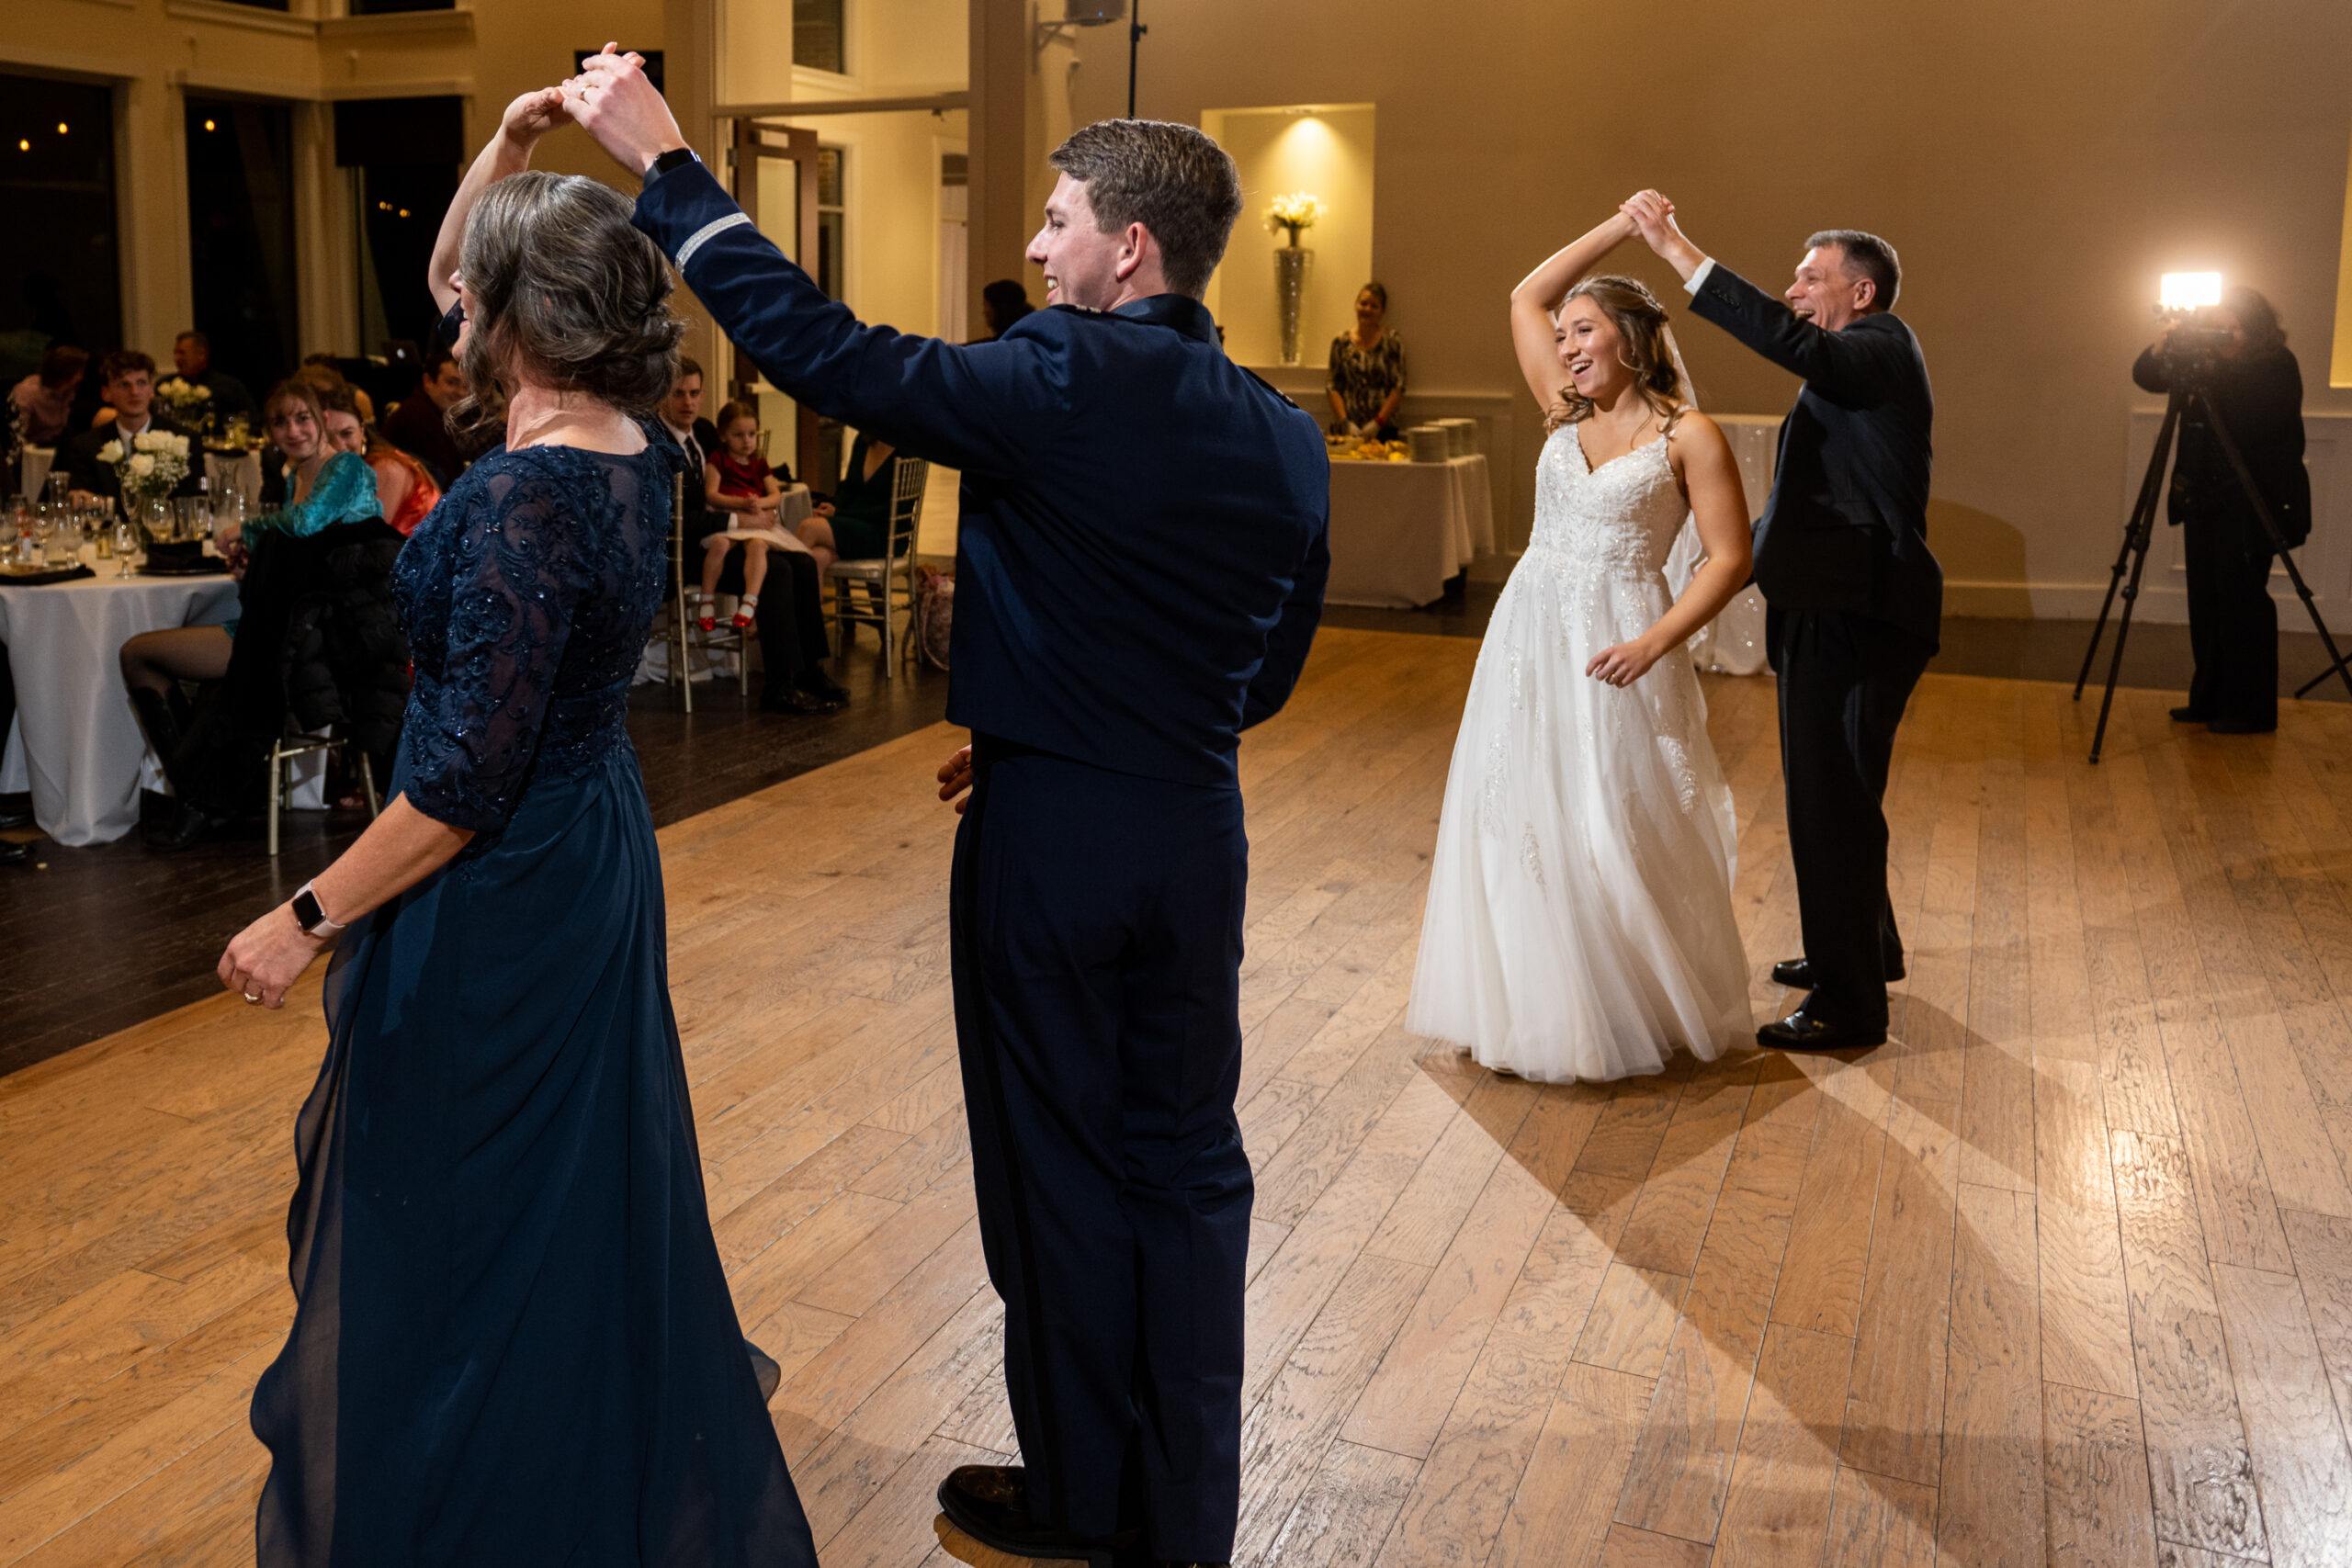 Jaime and Michael dance with their respective parents during their Ashley Ridge by Wedgewood wedding in Littleton, Colorado.